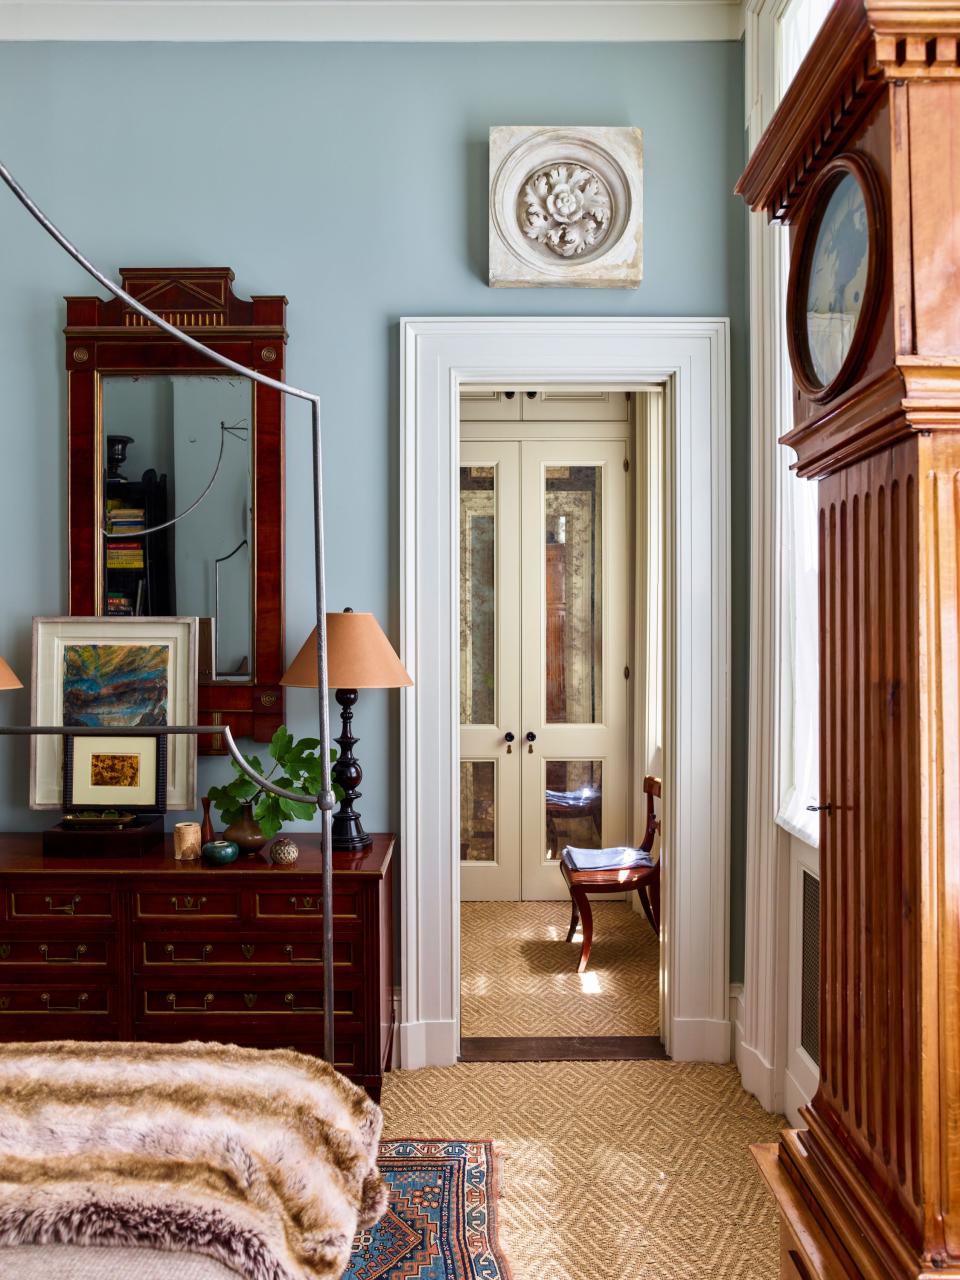 “I love layers and things that tell a story,” says Schafer. “Anyone who’s in this business falls in love with objects to their own peril.” In the bedroom, which is painted in Farrow & Ball’s Light Blue, an antique carpet found in Maine sits atop sea-grass wall-to-wall carpeting by Patterson Flynn & Martin. The 1940s chest of drawers from Sutter Antiques is topped with a Russian mirror from Evergreen Antiques and a contemporary pastel landscape sketch from Charles Plante Fine Arts. A plaster ceiling medallion found at the Pier Antiques Show hangs above a doorframe leading to the dressing area.